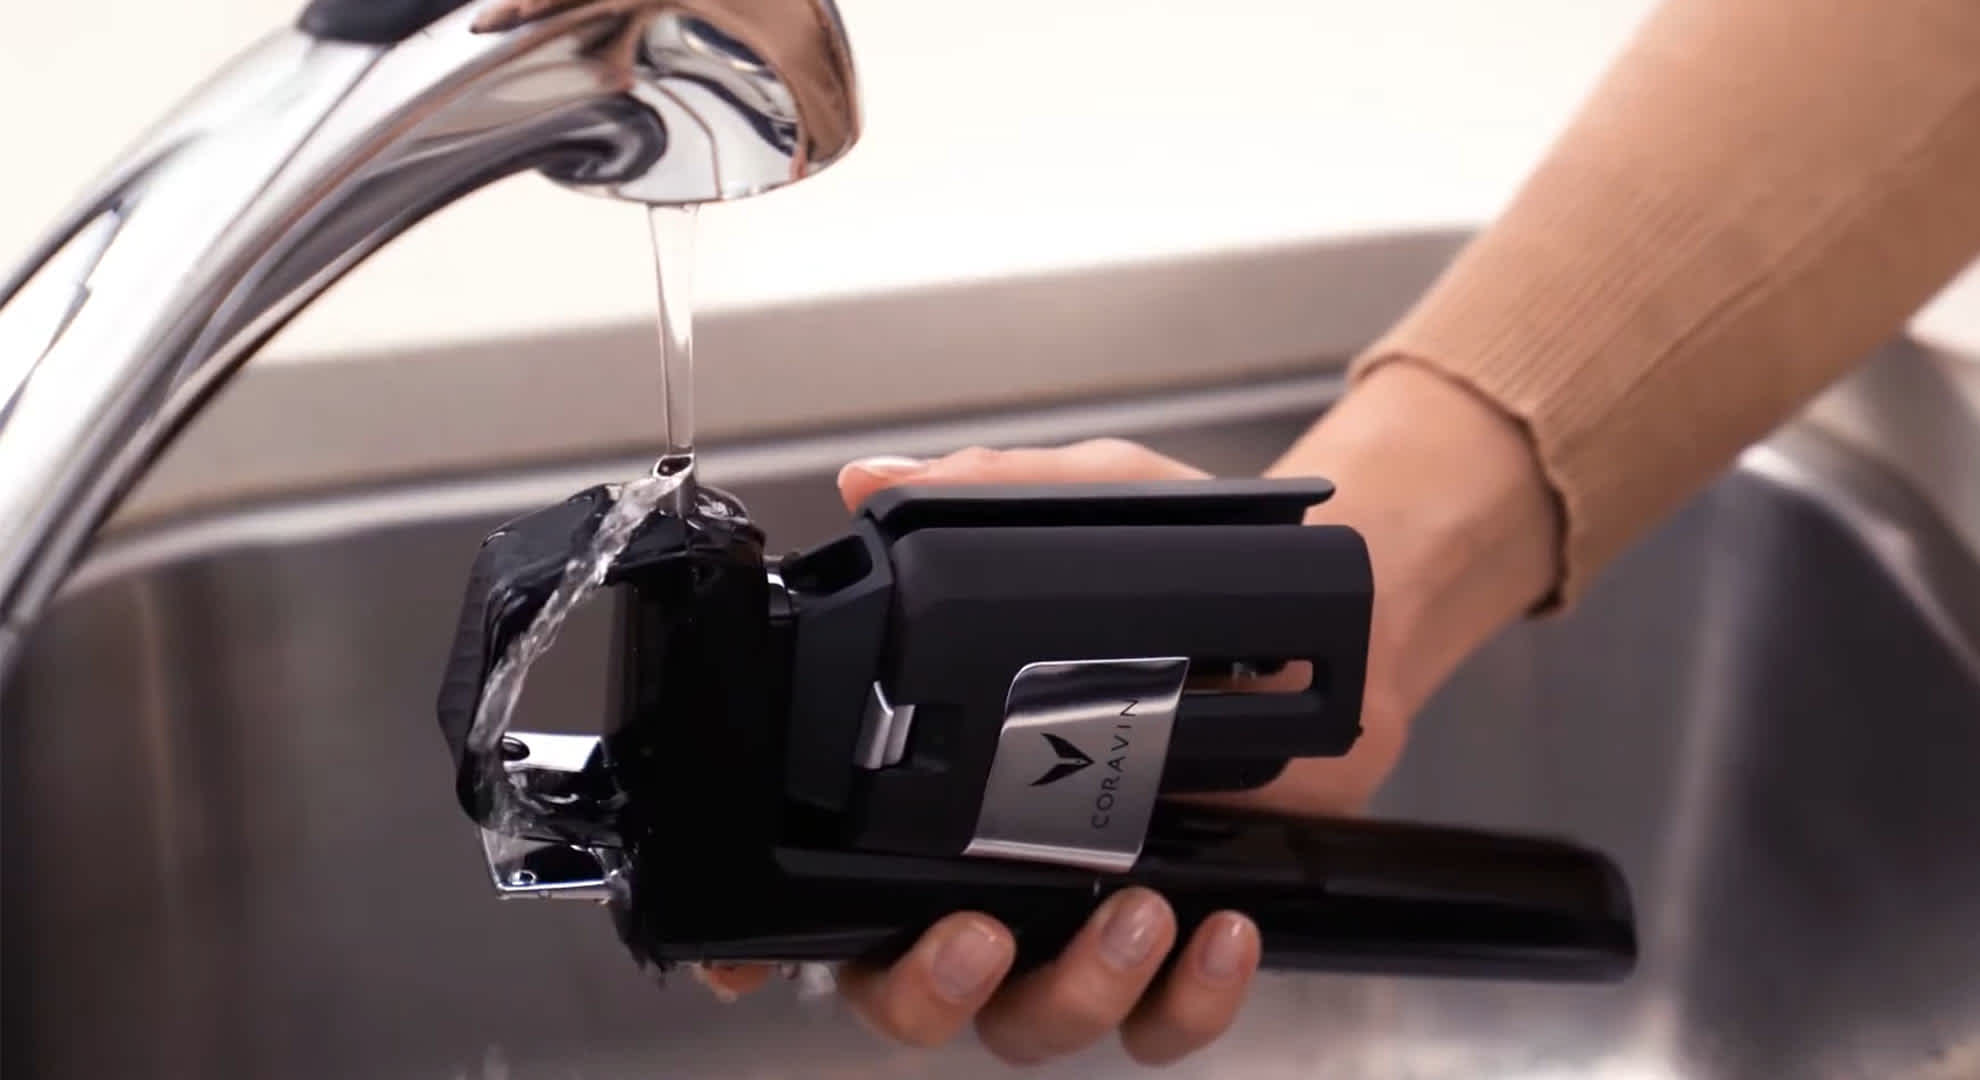 Coravin Model Six Wine Preservation System under a running tap
